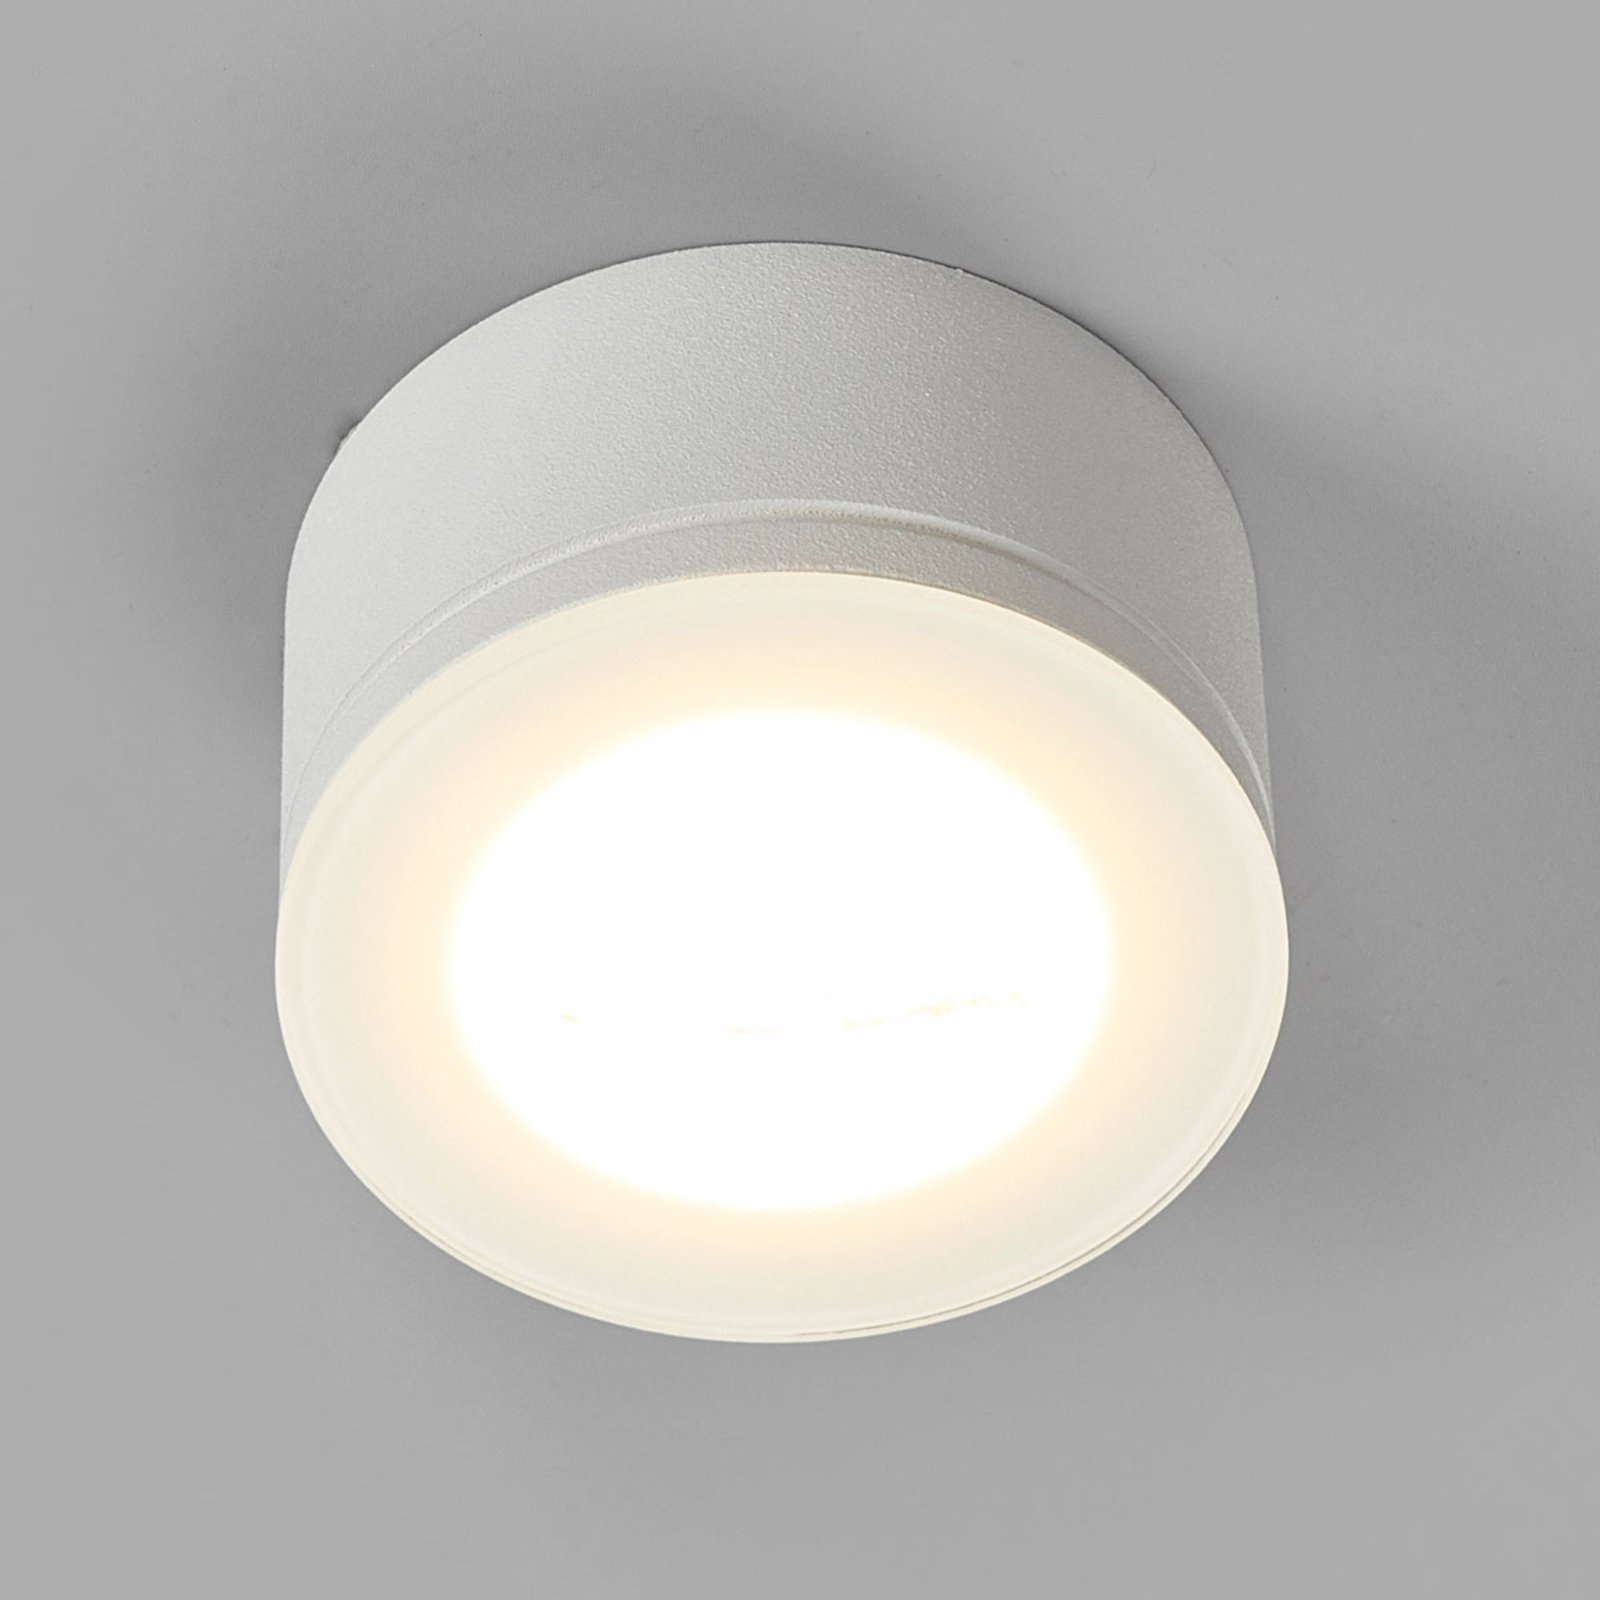 Newton 35 LED ceiling spotlight for indoor and out | Lights.ie